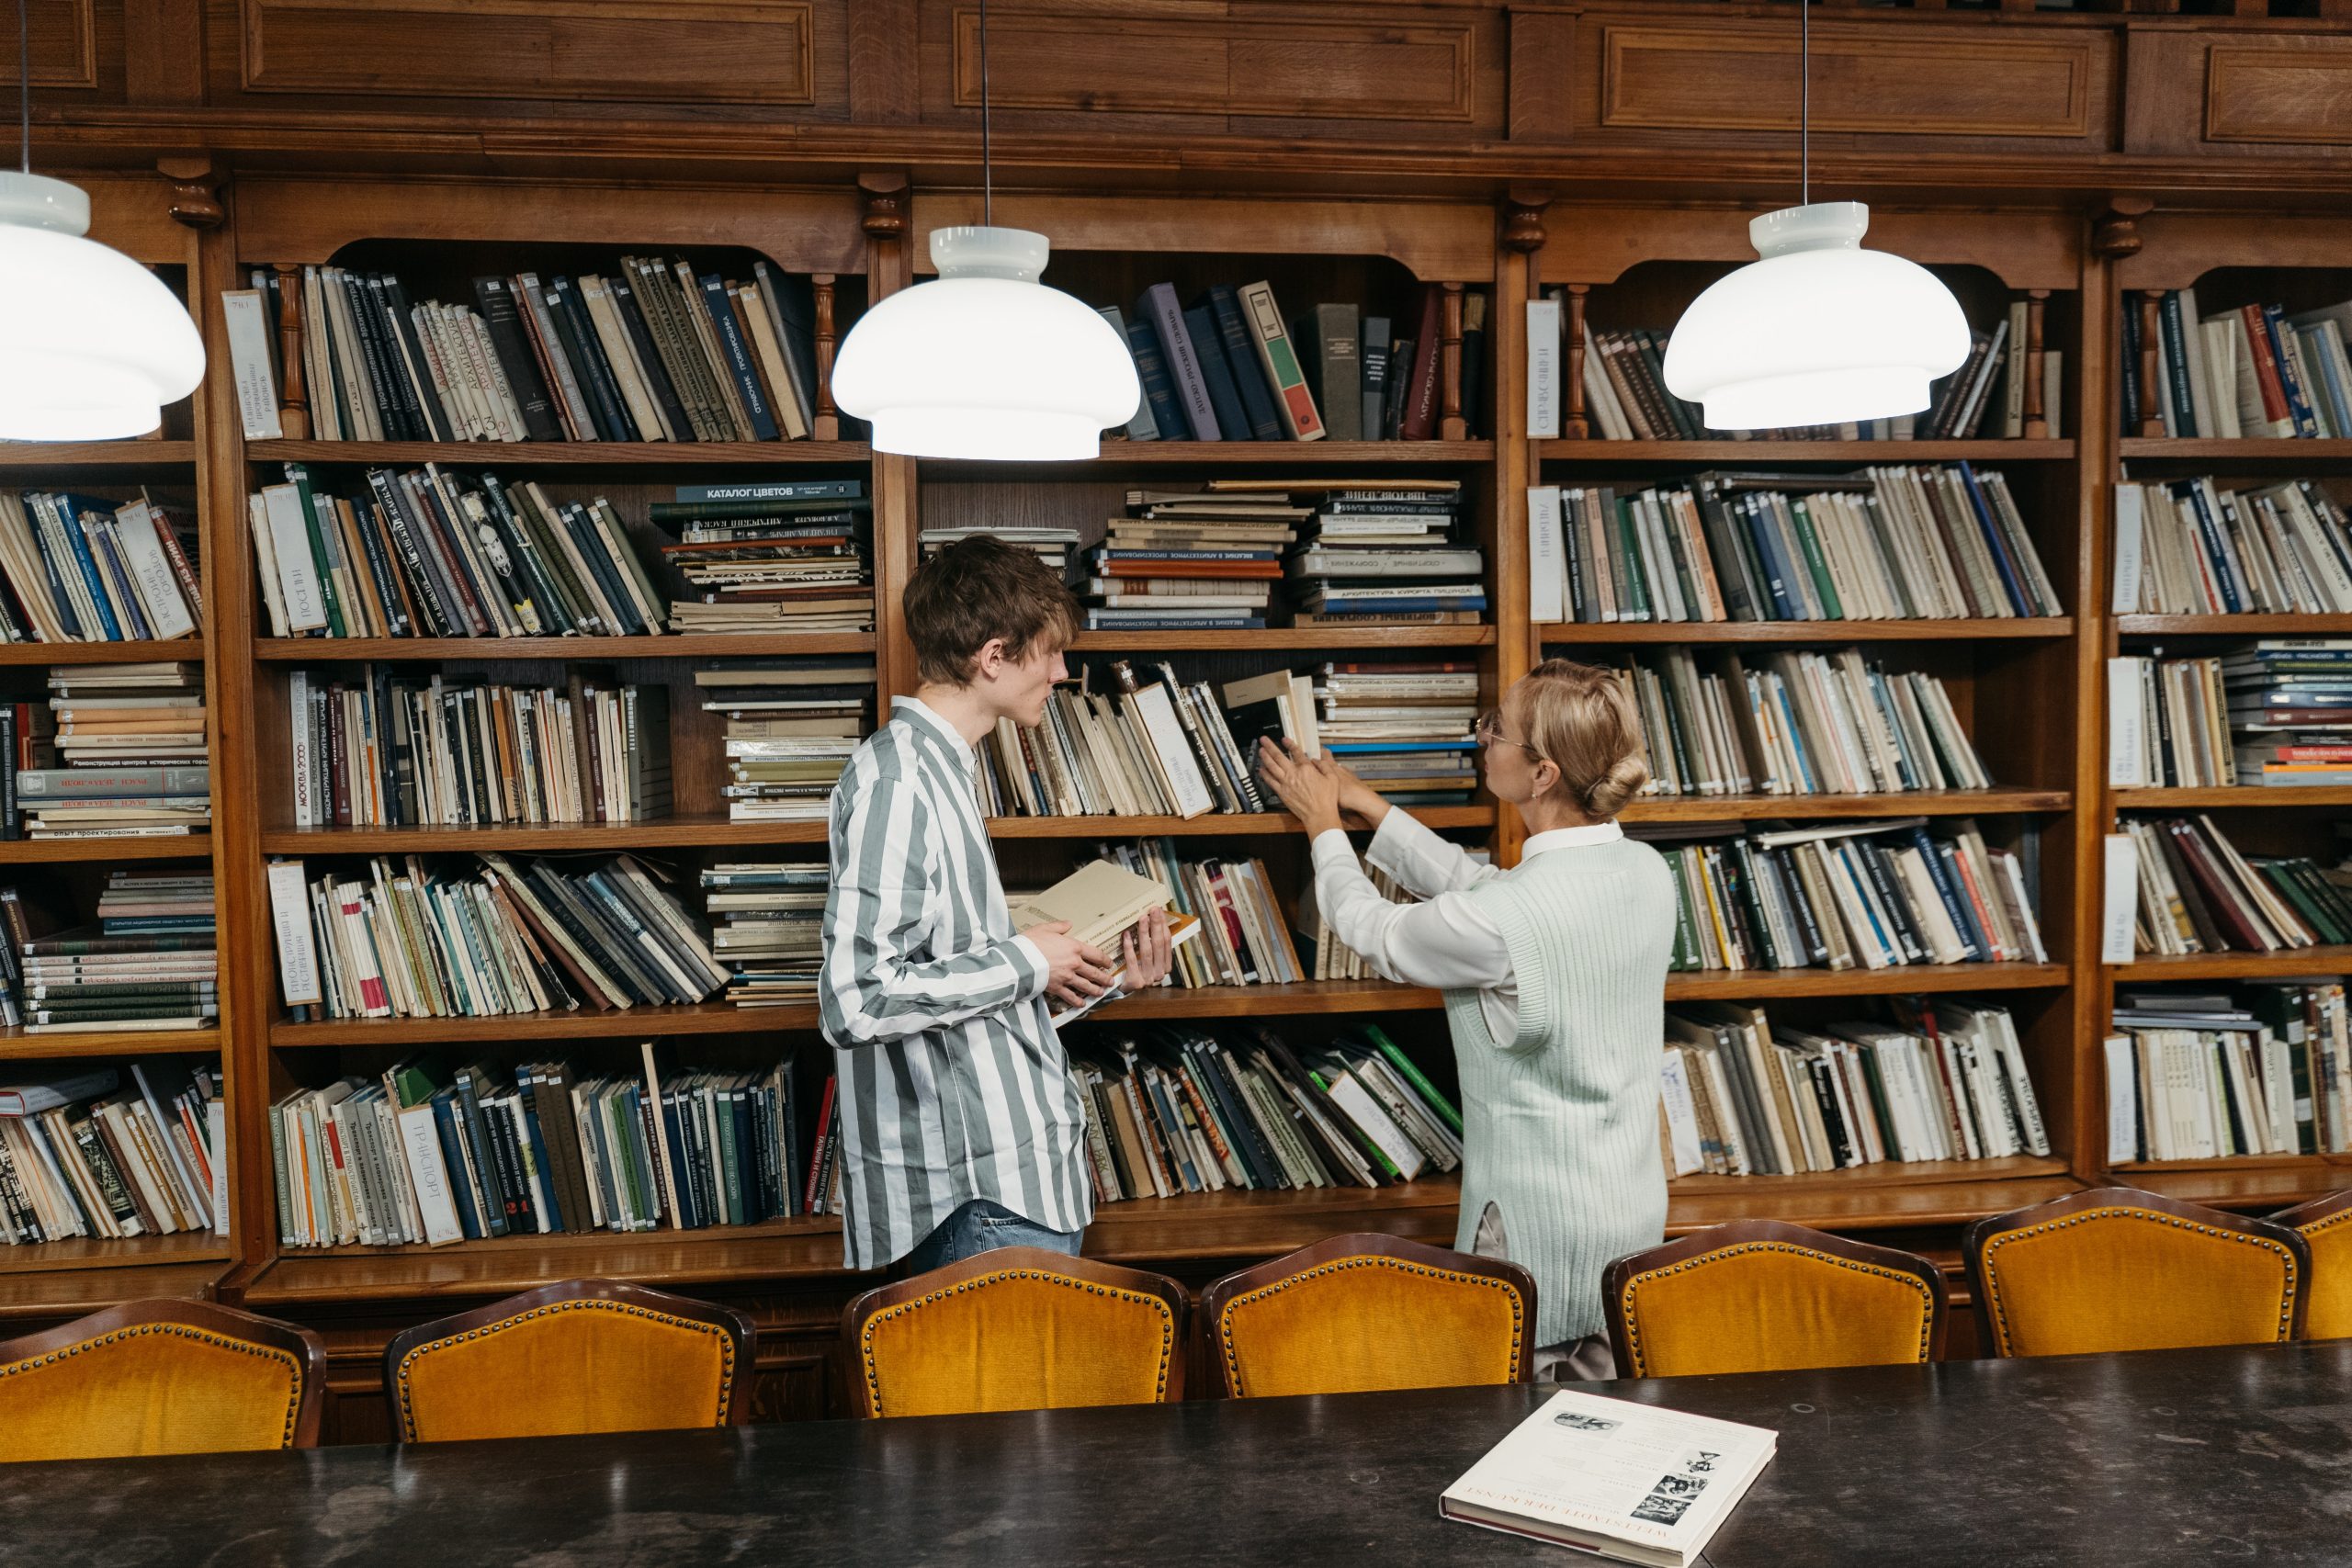 Student and Teacher in front of a book shelf with cloud shaped lights hanging from the ceiling.